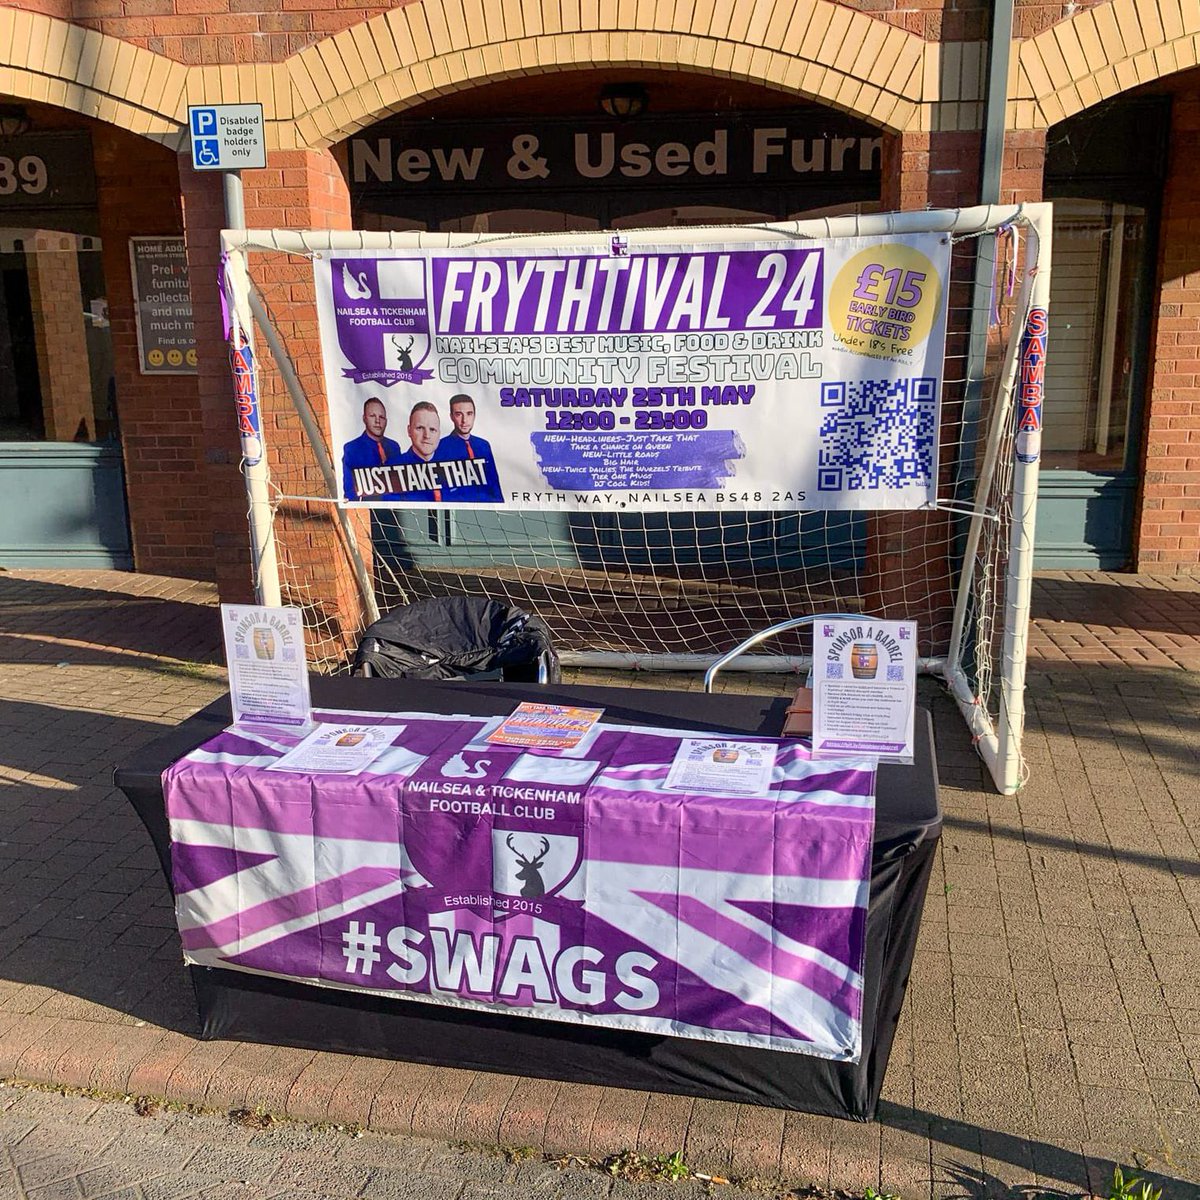 Our Swags Club Officials are already prepared for the local Farmers Market in Nailsea high street with the limited Early Bird tickets 🎟️ Come along, say hello and get your early bird tickets from us for Frythtival Festival! 💜 #swags @nailseapeeps